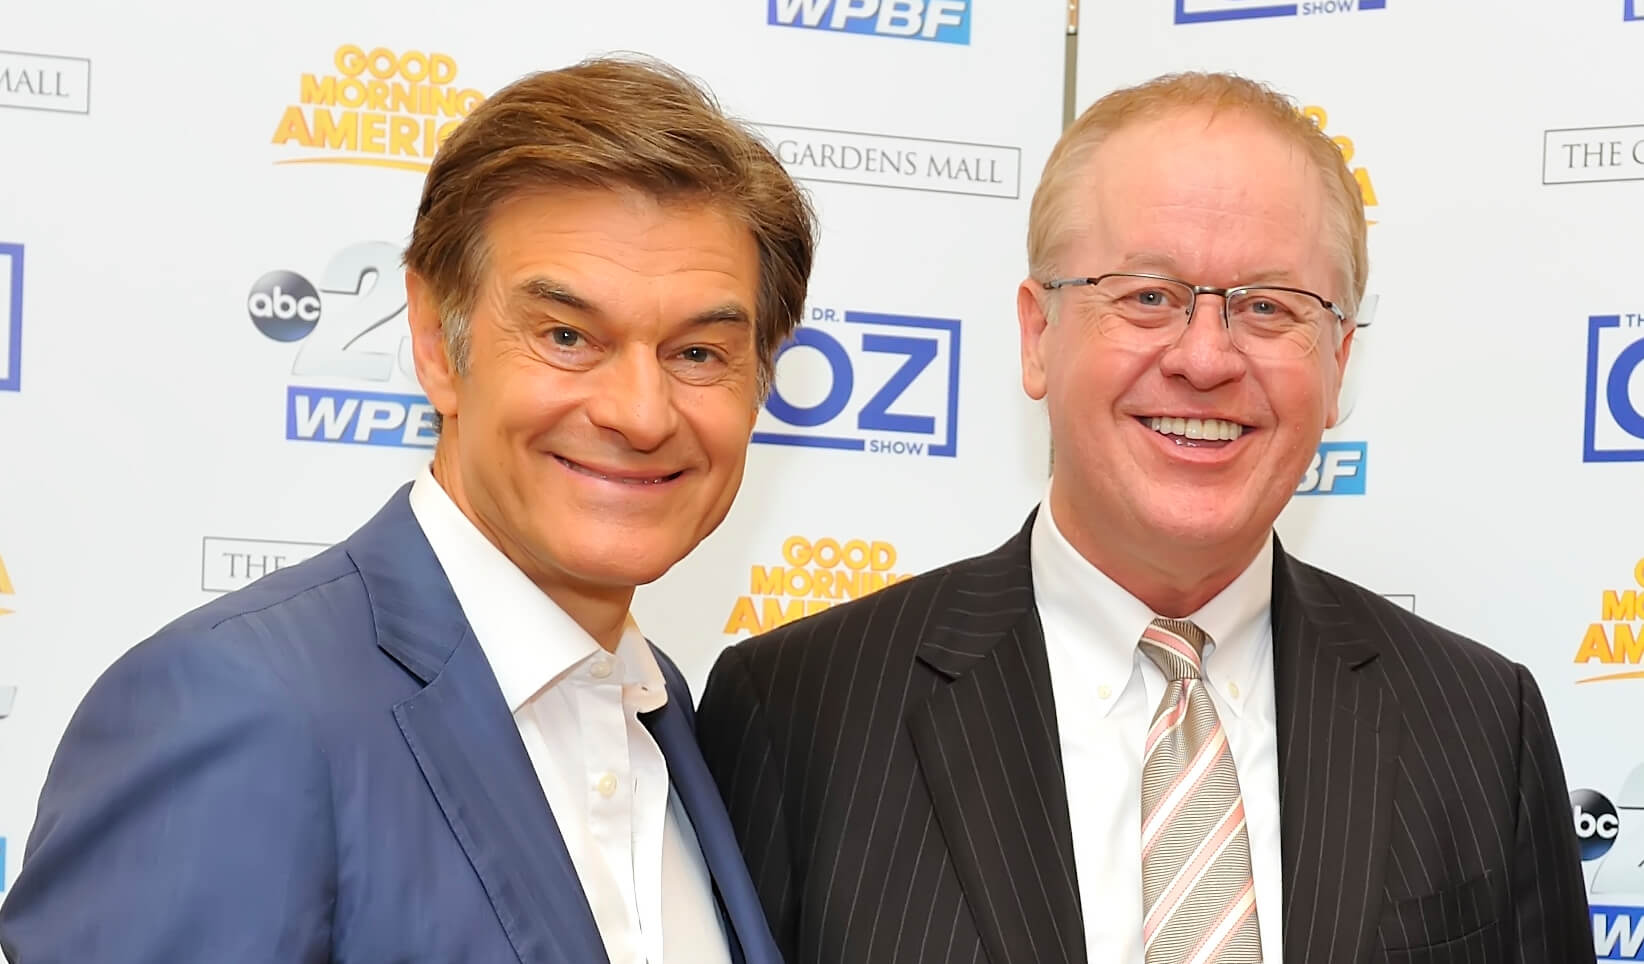 Terry Newmyer and Dr. Oz pictured here worked to promote healthy living at The Gardens Mall health festival in West Palm Beach - (This was April 2017)